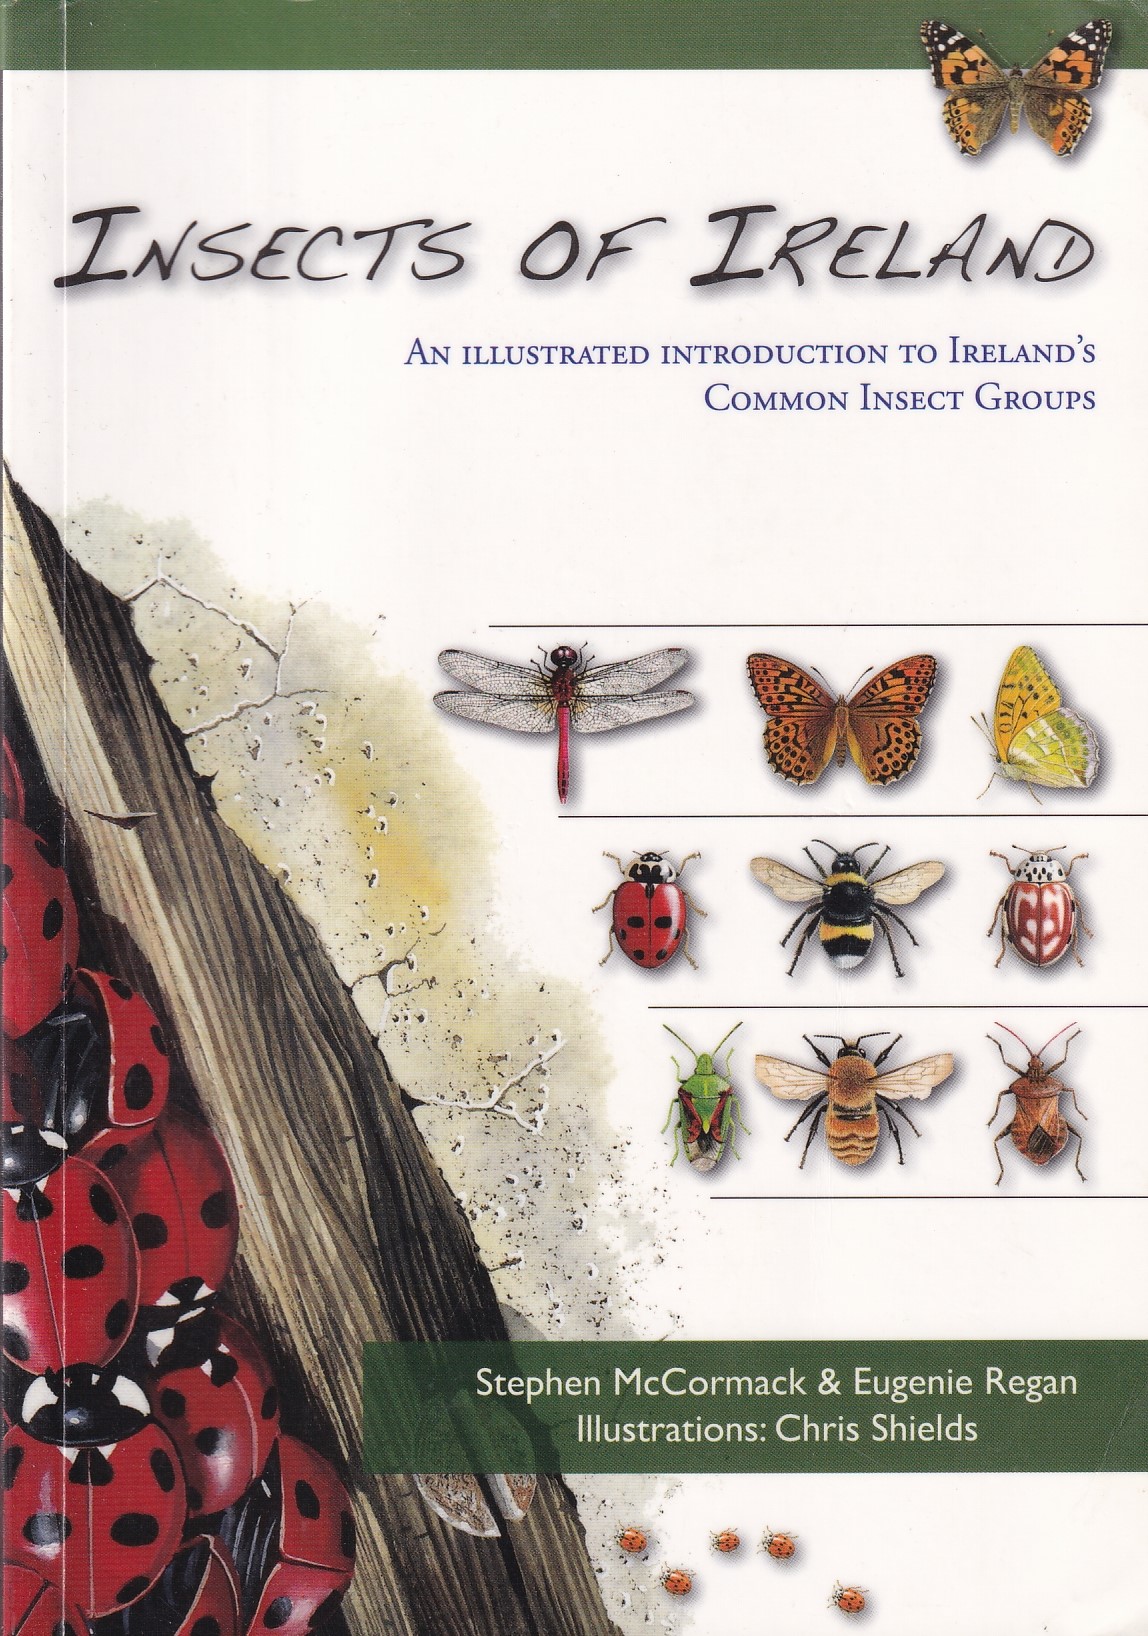 Insects of Ireland: An Illustrated Introduction to Ireland’s Butterflies, Ladybirds, Ants | McCormack, Stephen | Charlie Byrne's